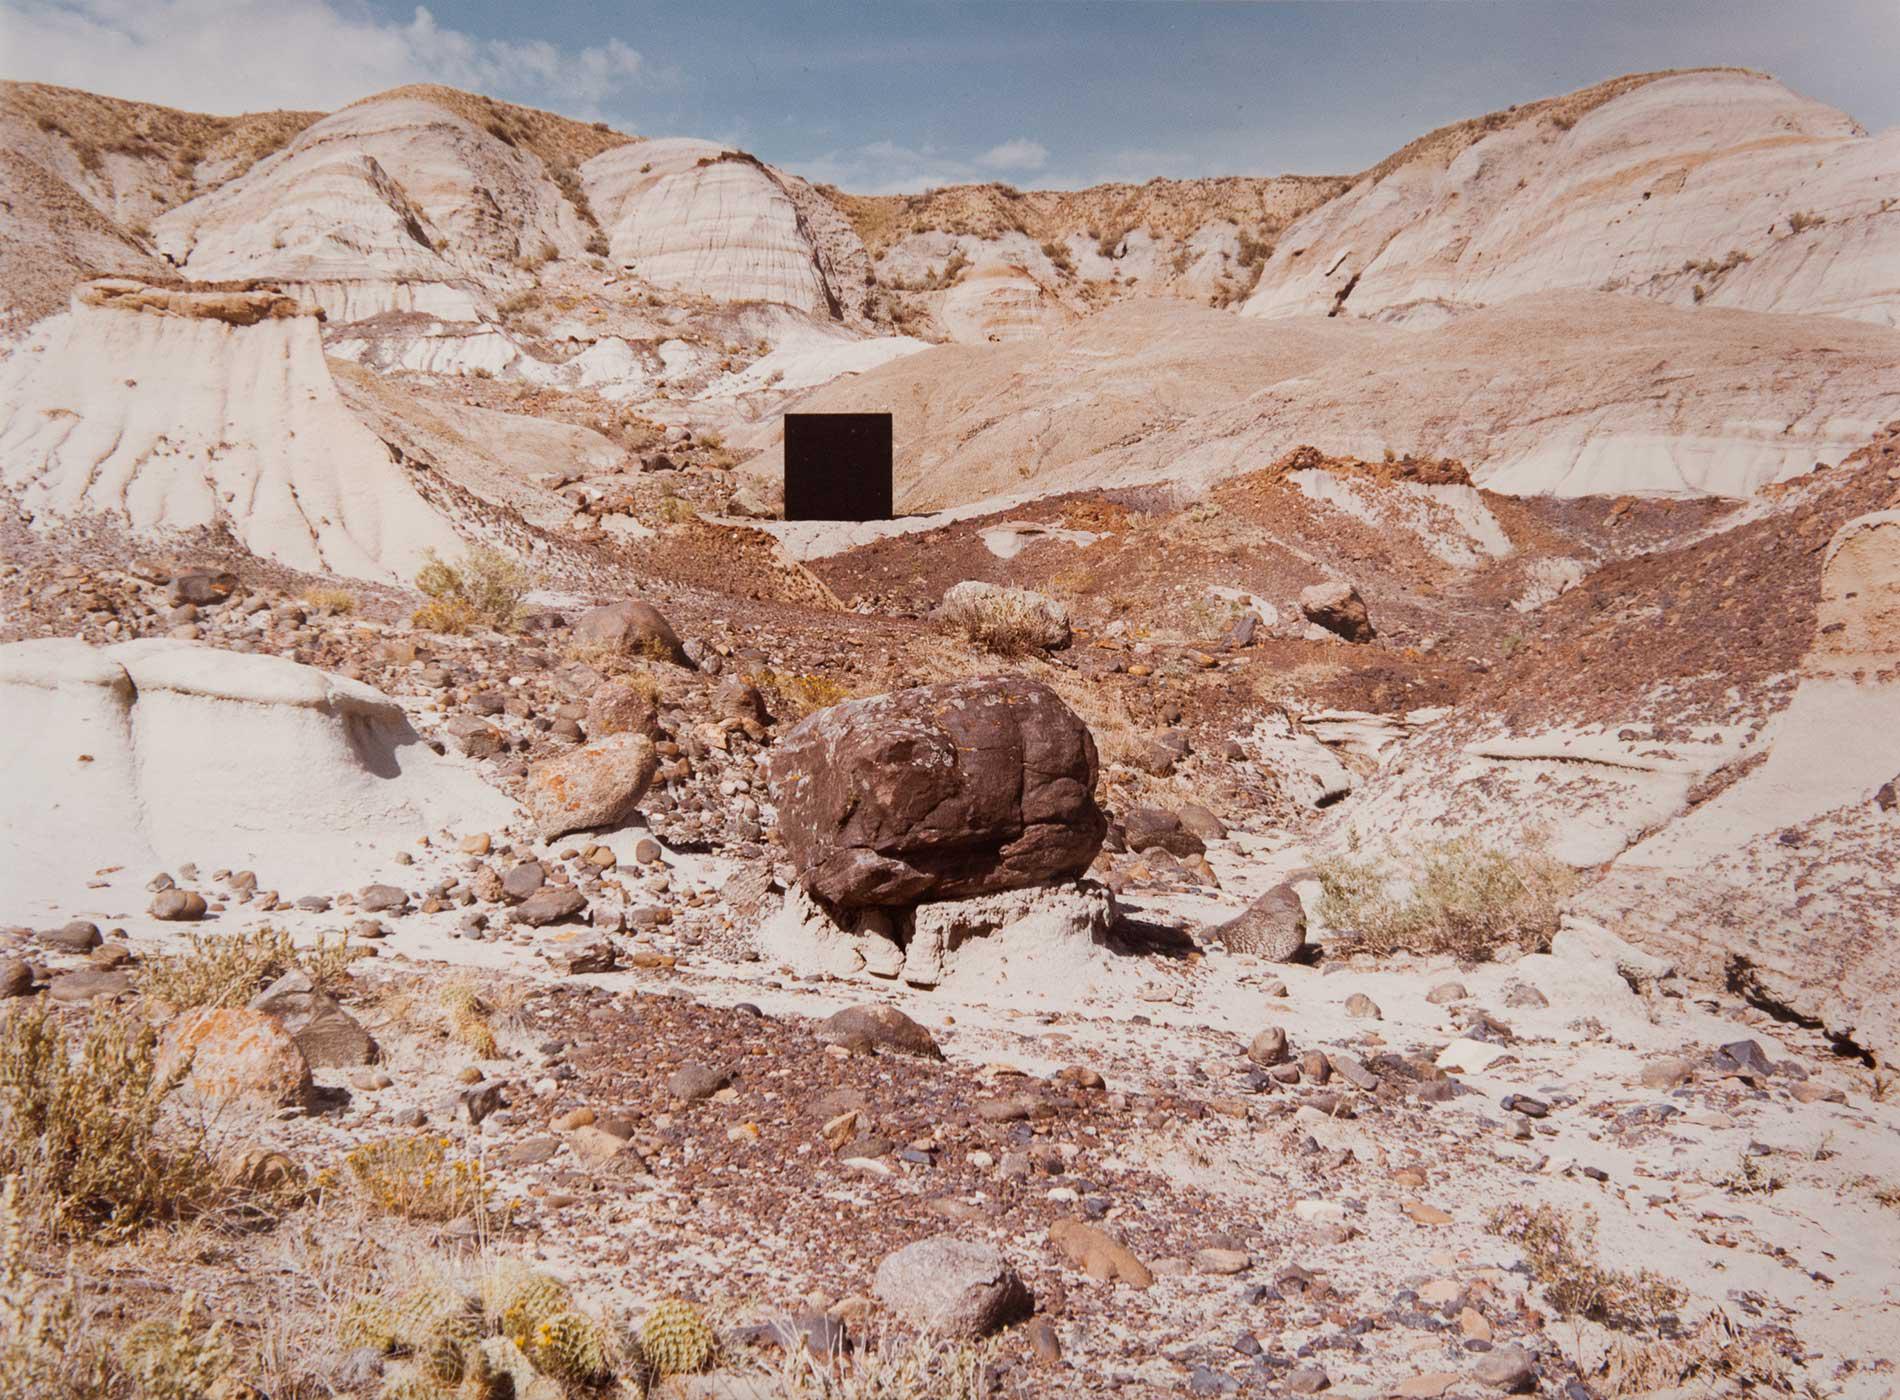 A mysterious black box in the middle of a desert